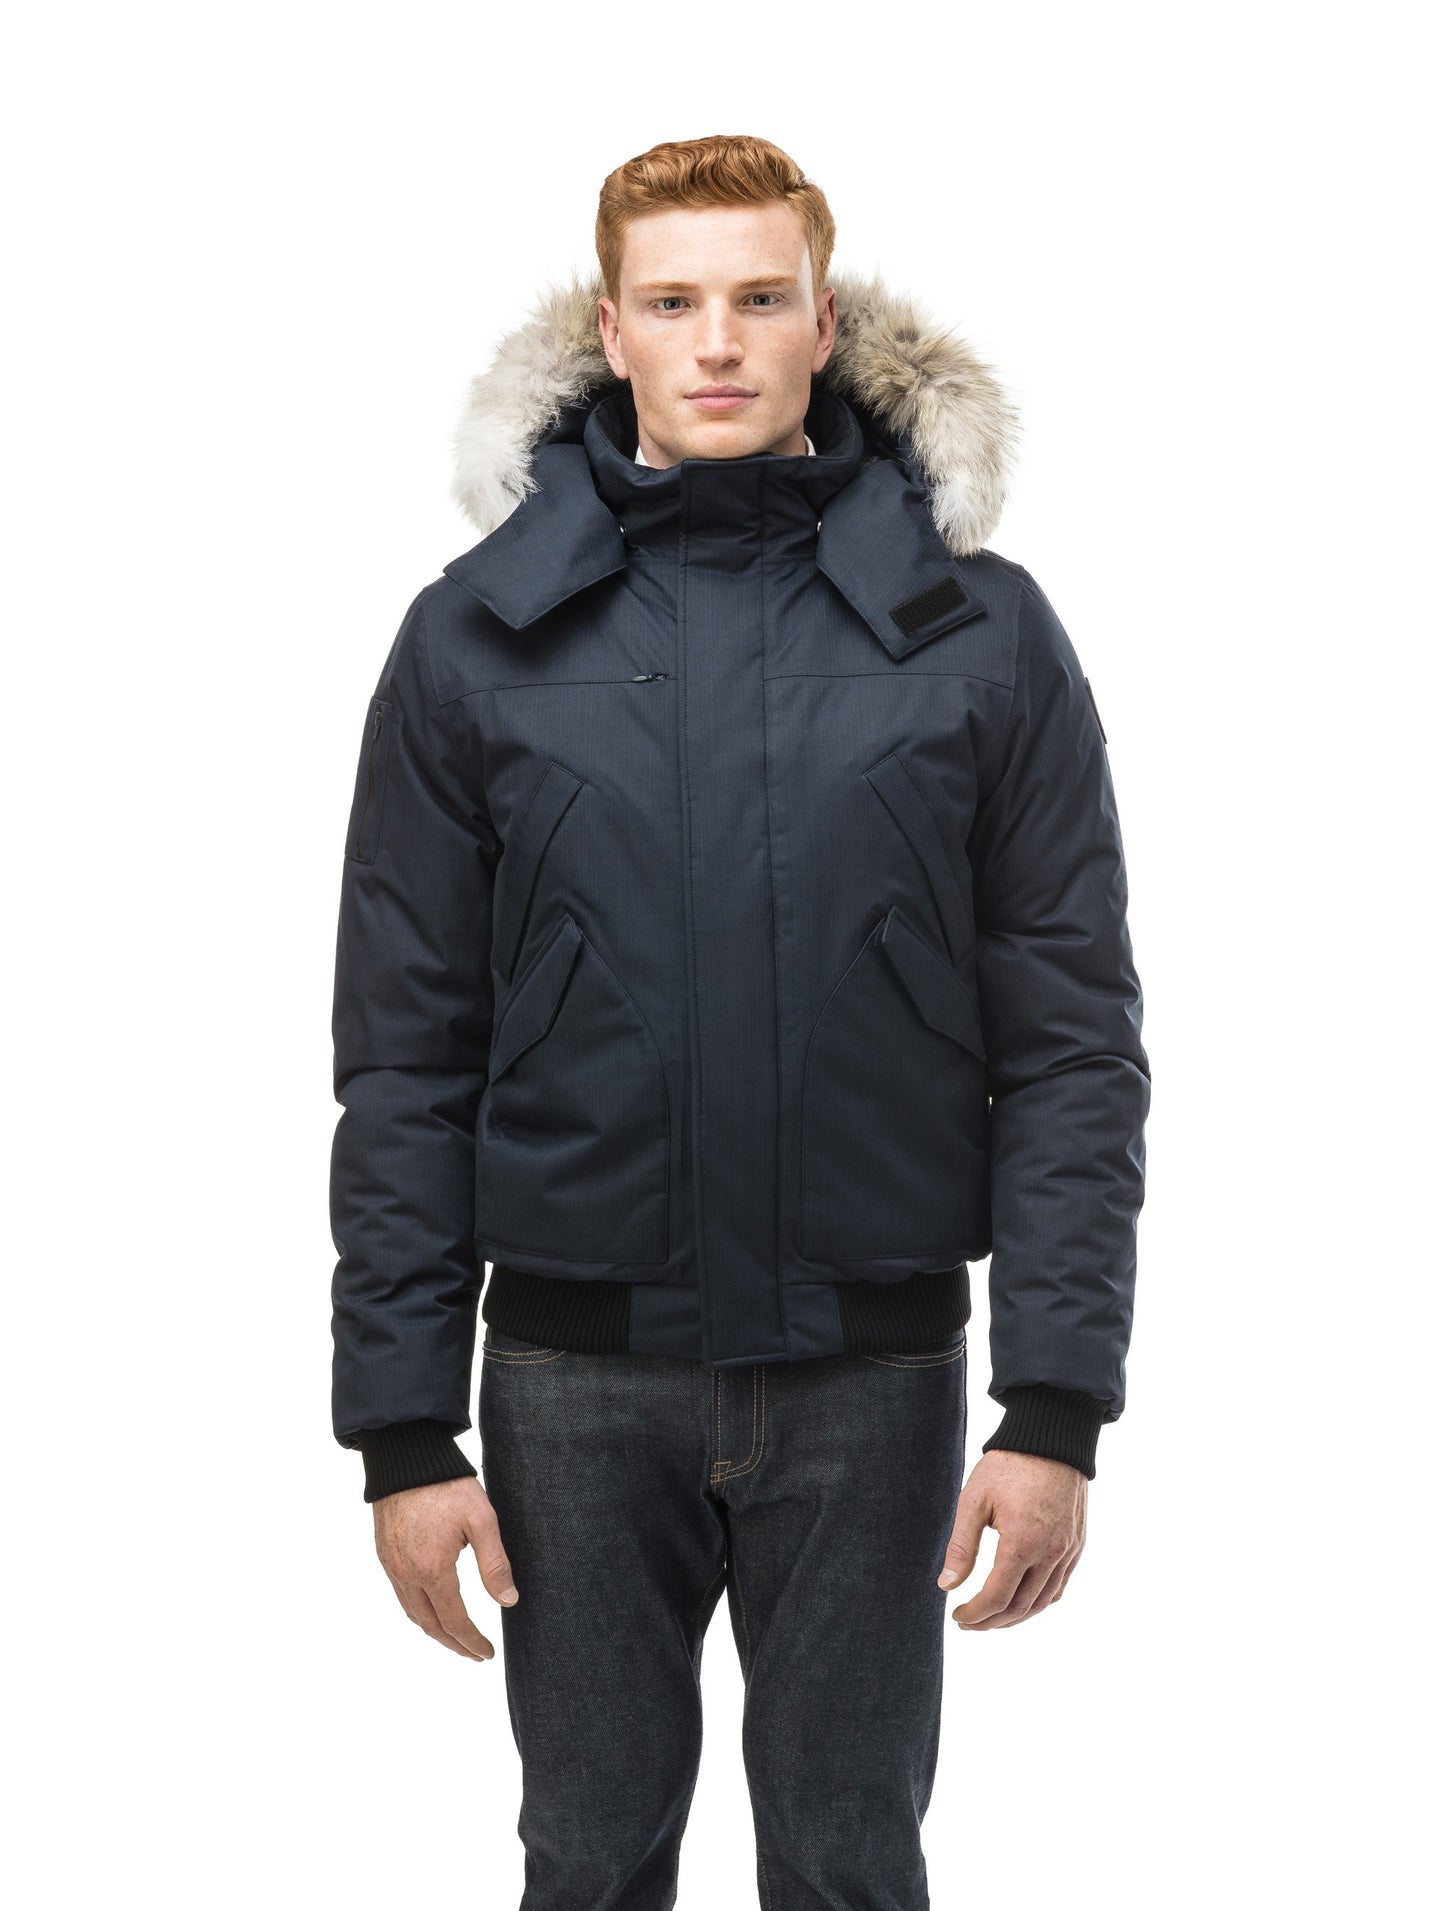 Men's classic down filled bomber jacket with a down filledÂ hood that features a removable coyote fur trim and concealed moldable framing wire in Navy